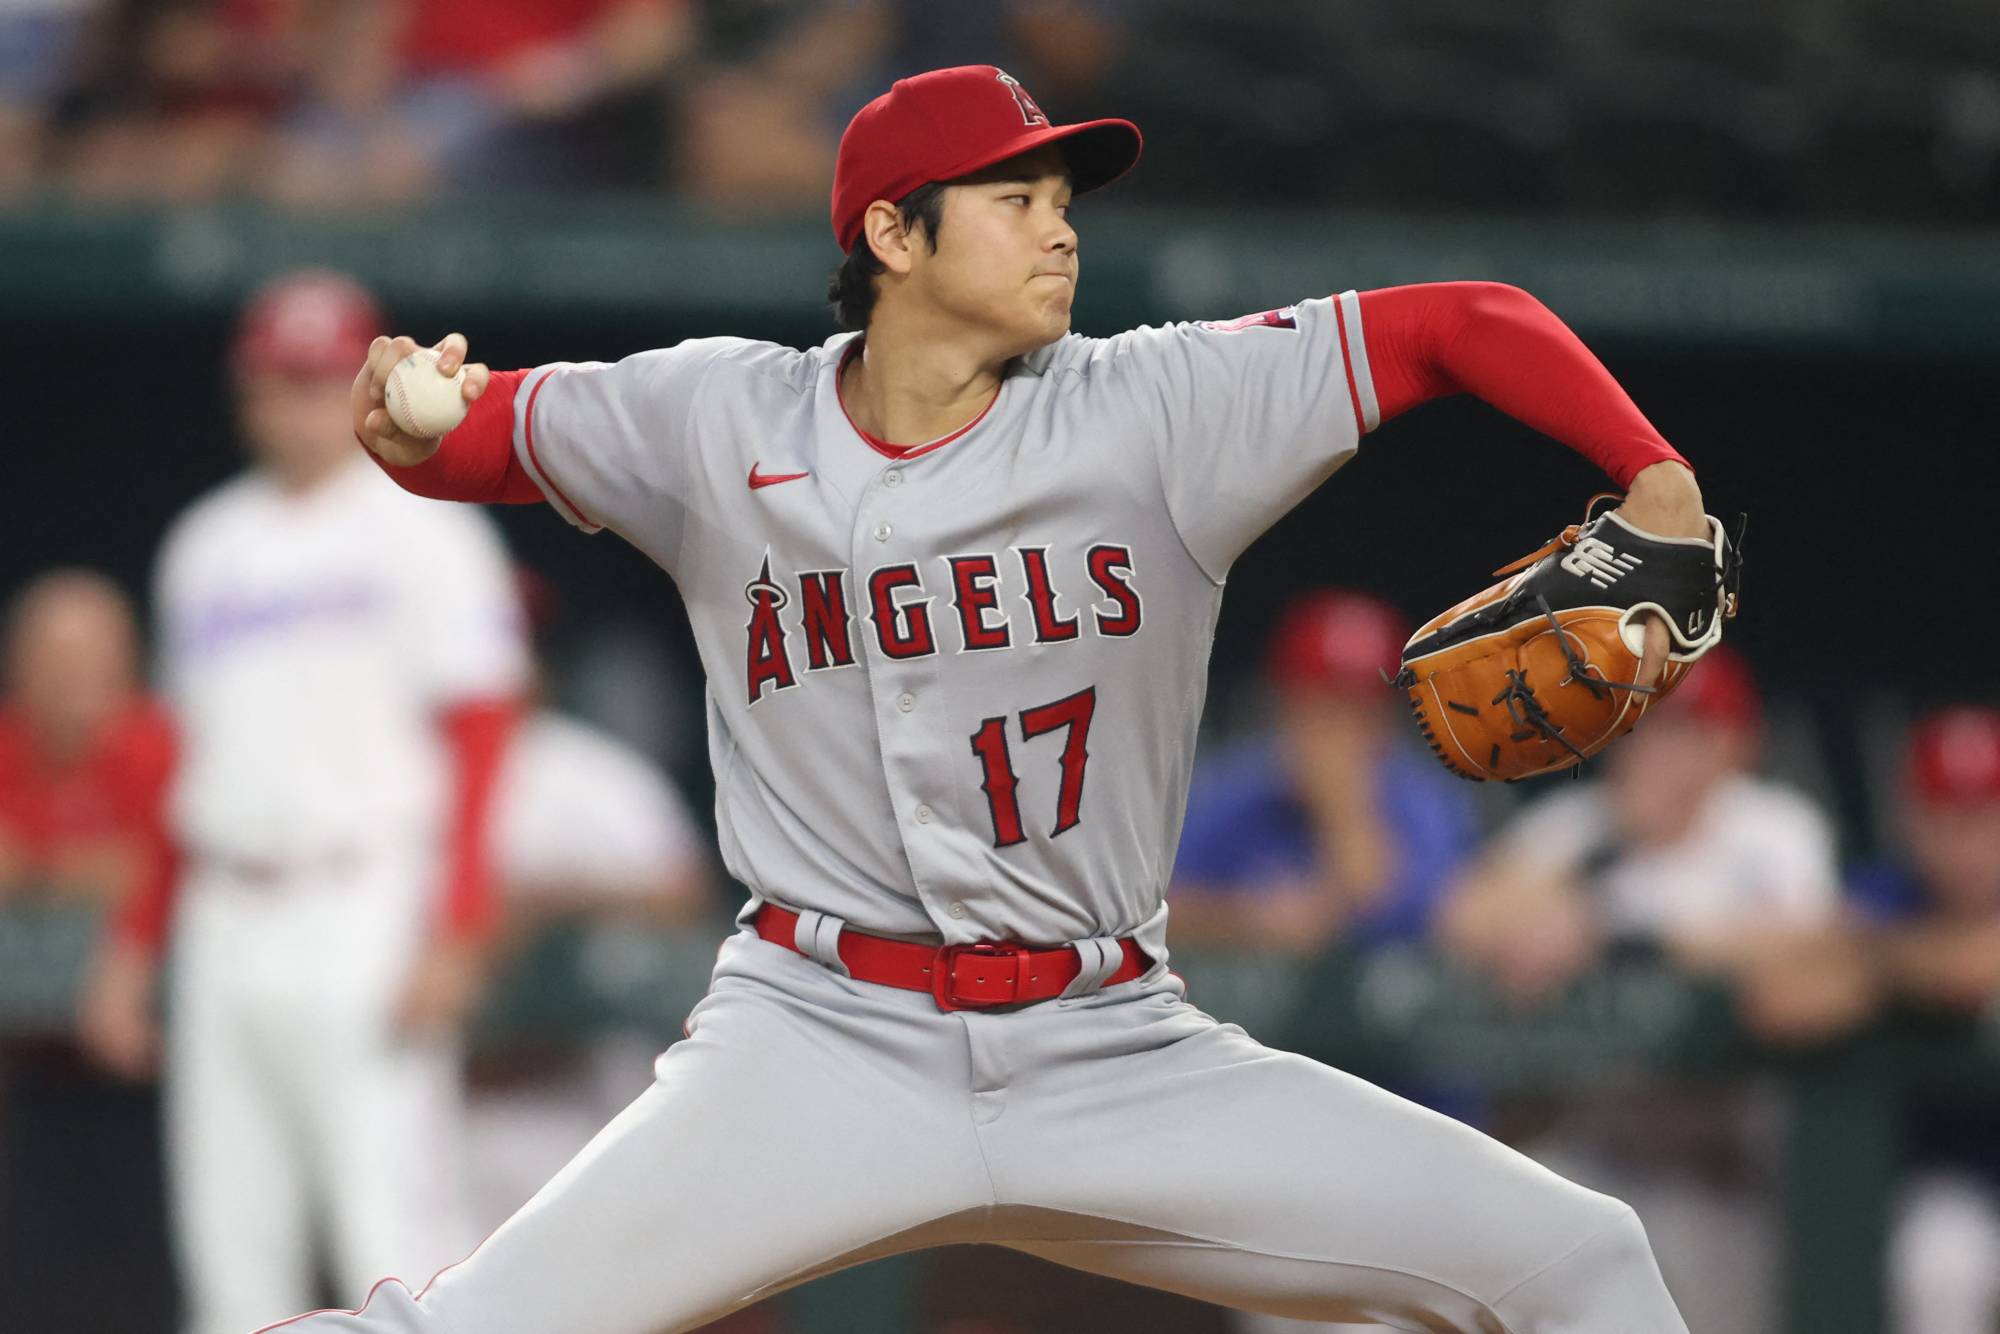 Shohei Ohtani Named To All Star Roster As Pitcher After Also Earning Spot As DH The Japan Times